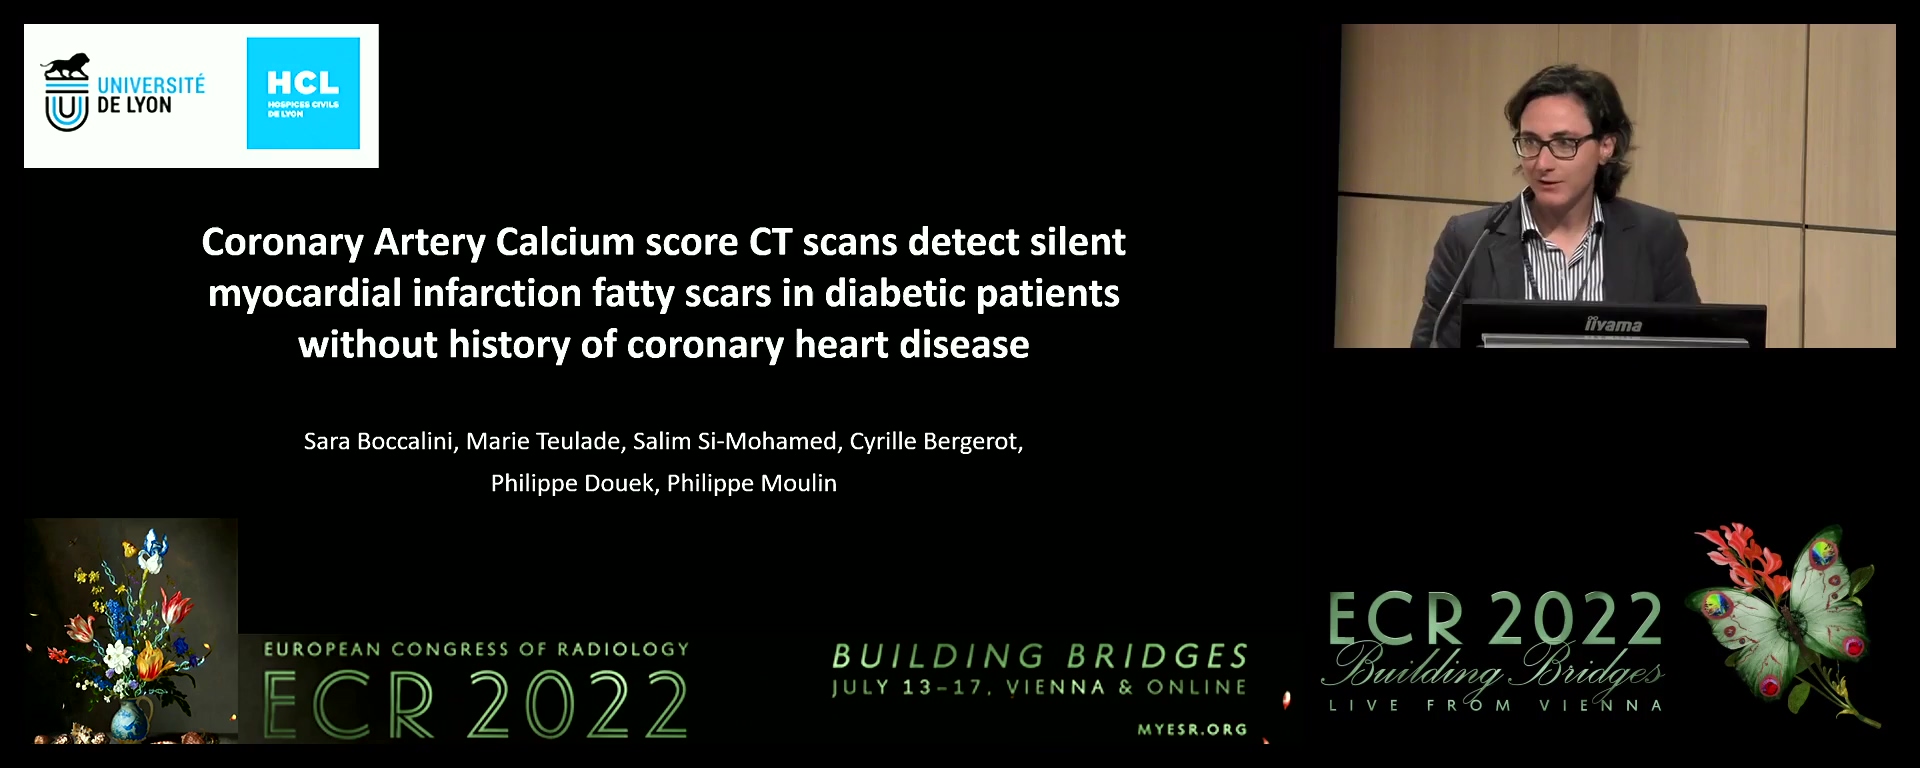 Silent myocardial infarction fatty scars detected by coronary calcium score CT scan in diabetic patients without history of coronary heart disease - Sara Boccalini, Bron / FR